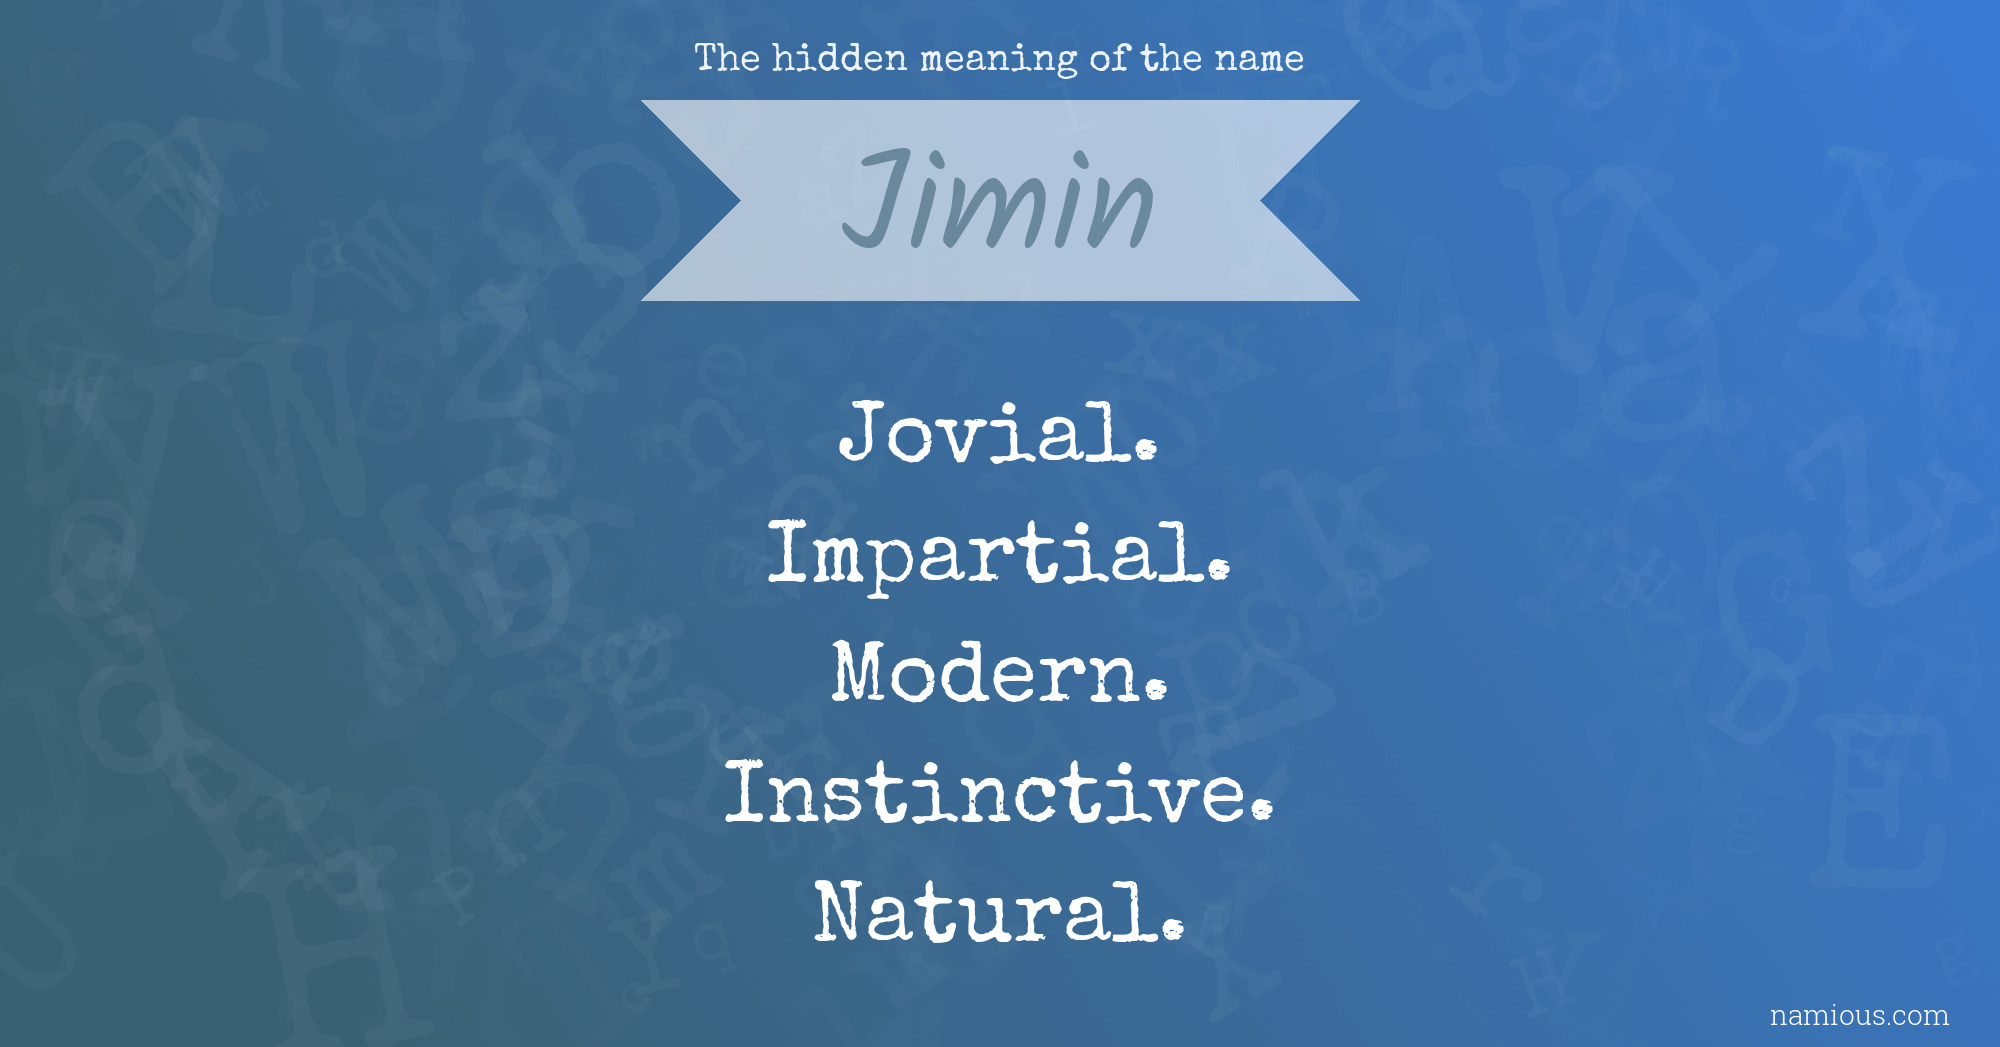 The hidden meaning of the name Jimin